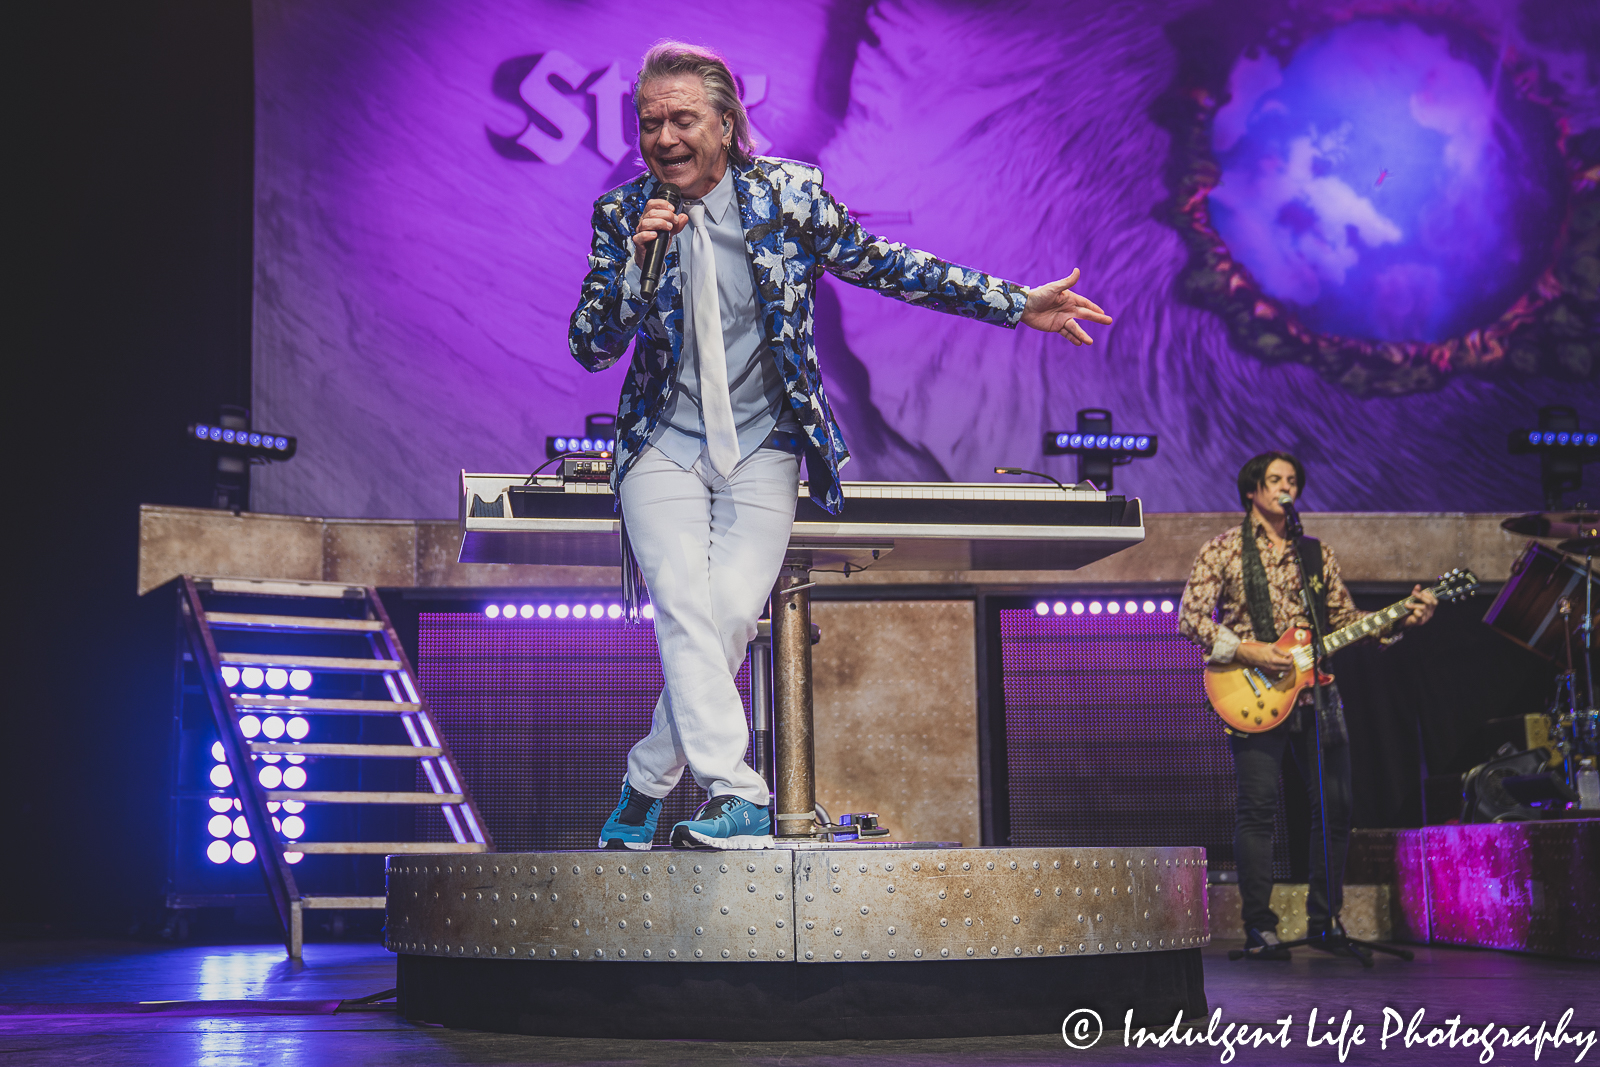 Styx lead singer and keyboardist Lawrence Gowan performing with guitarist Will Evankovich at Starlight Theatre in Kansas City, MO on June 14, 2022.